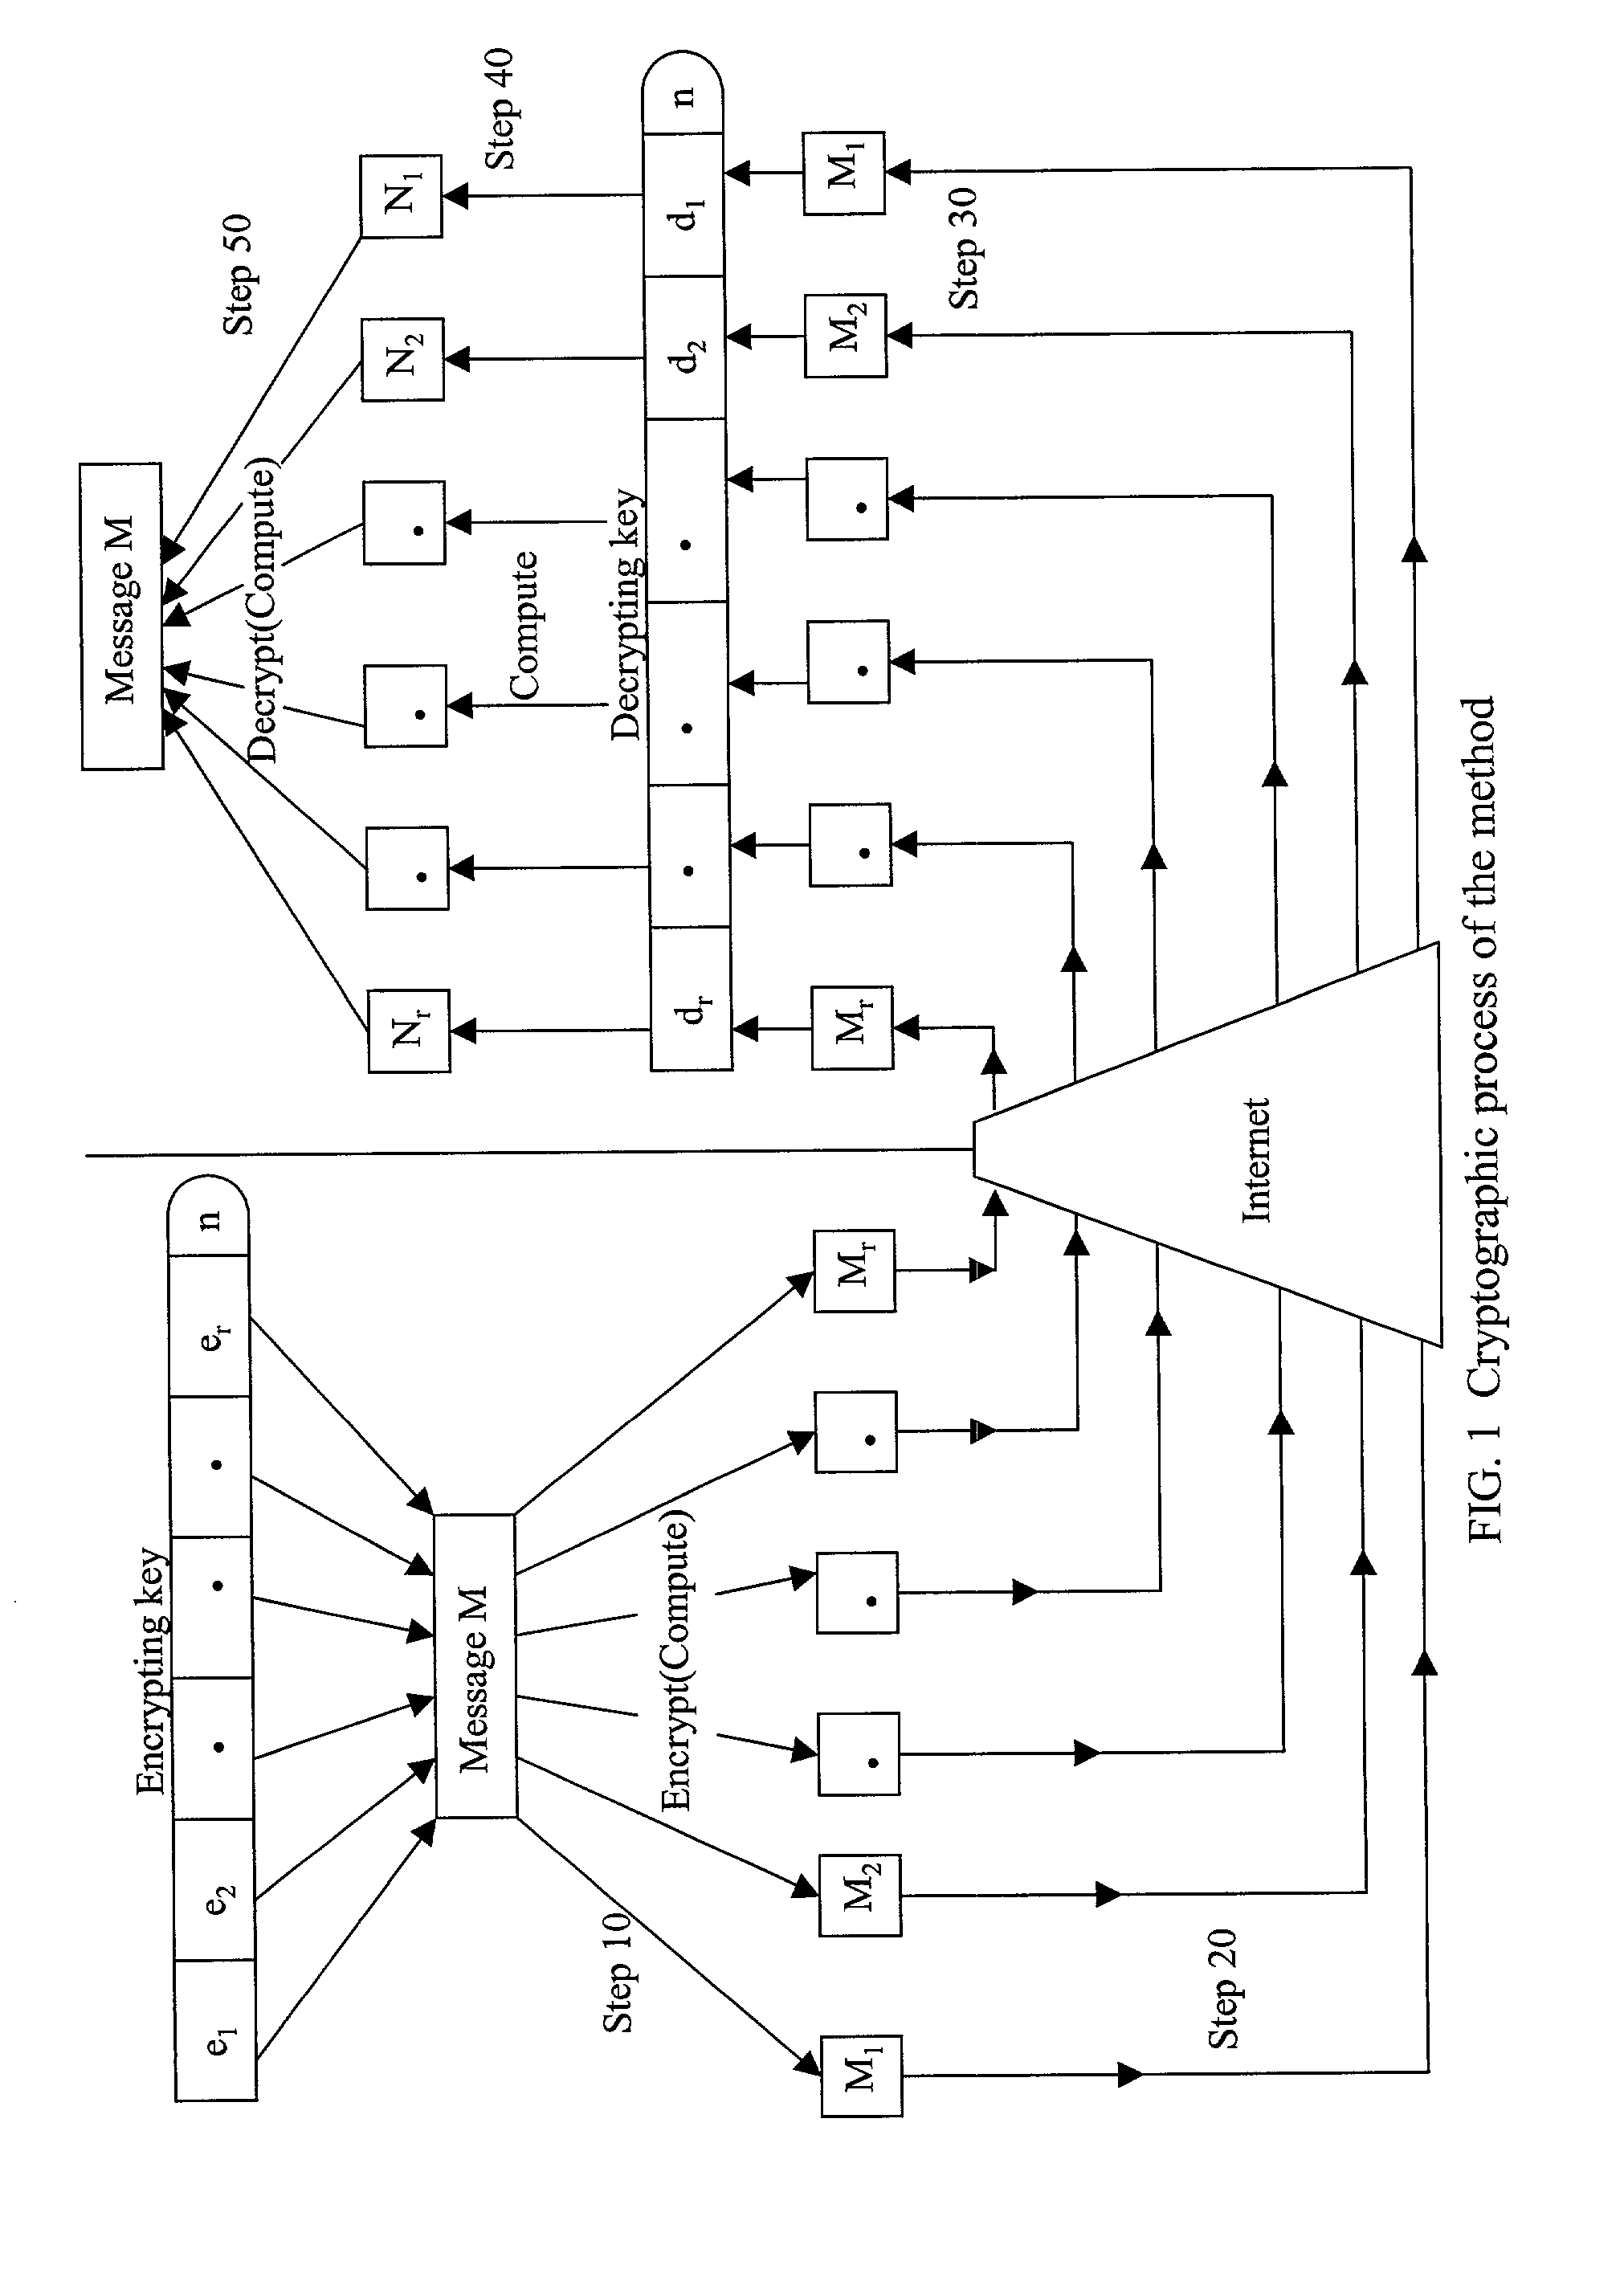 Absolute public key cryptographic system and method surviving private-key compromise with other advantages